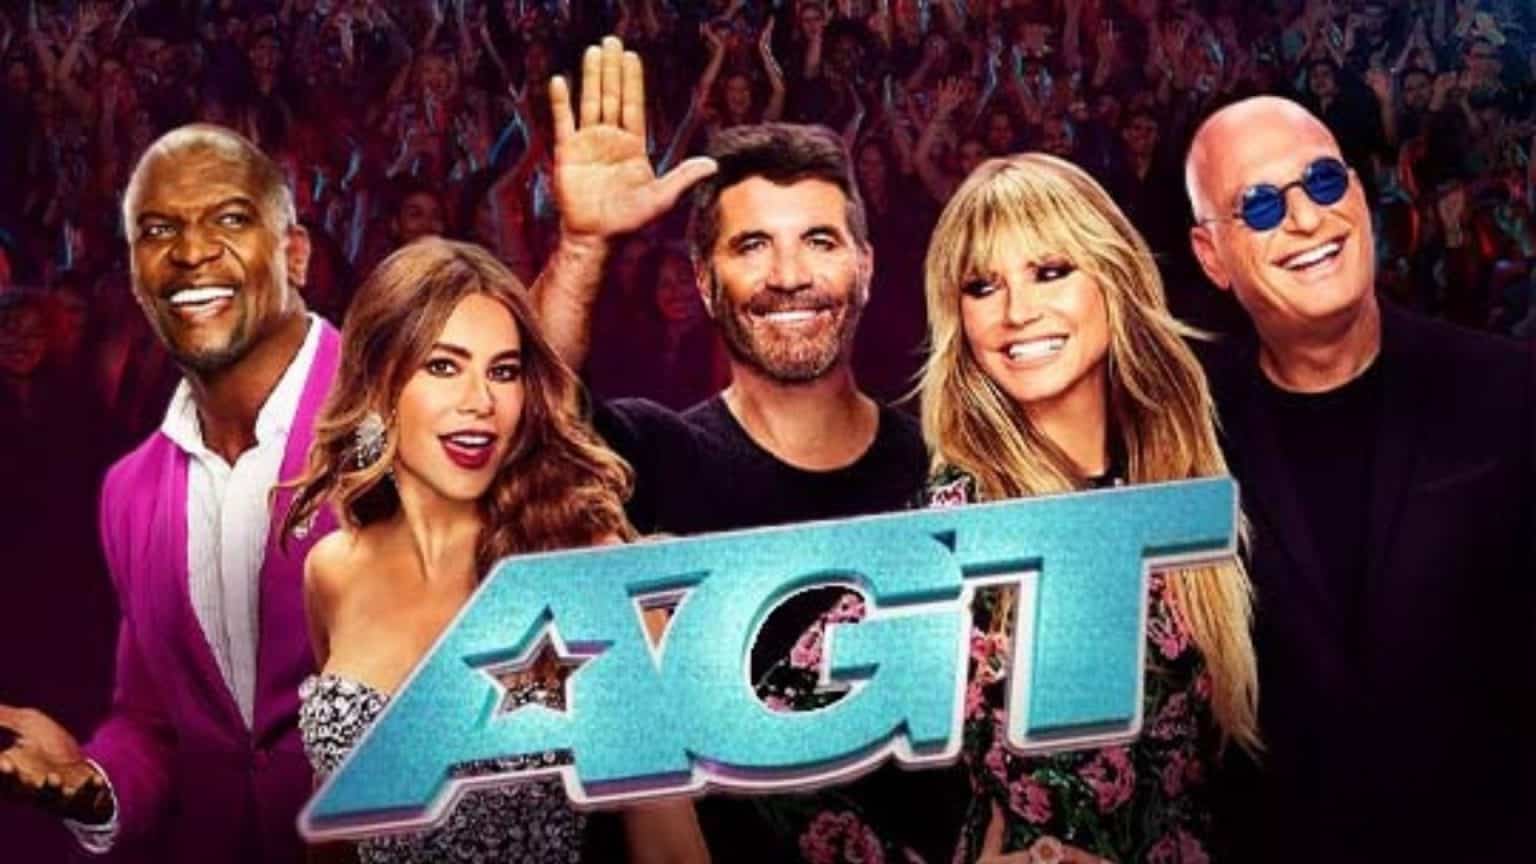 America's Got Talent All Stars Episode 4 Release Date, Preview